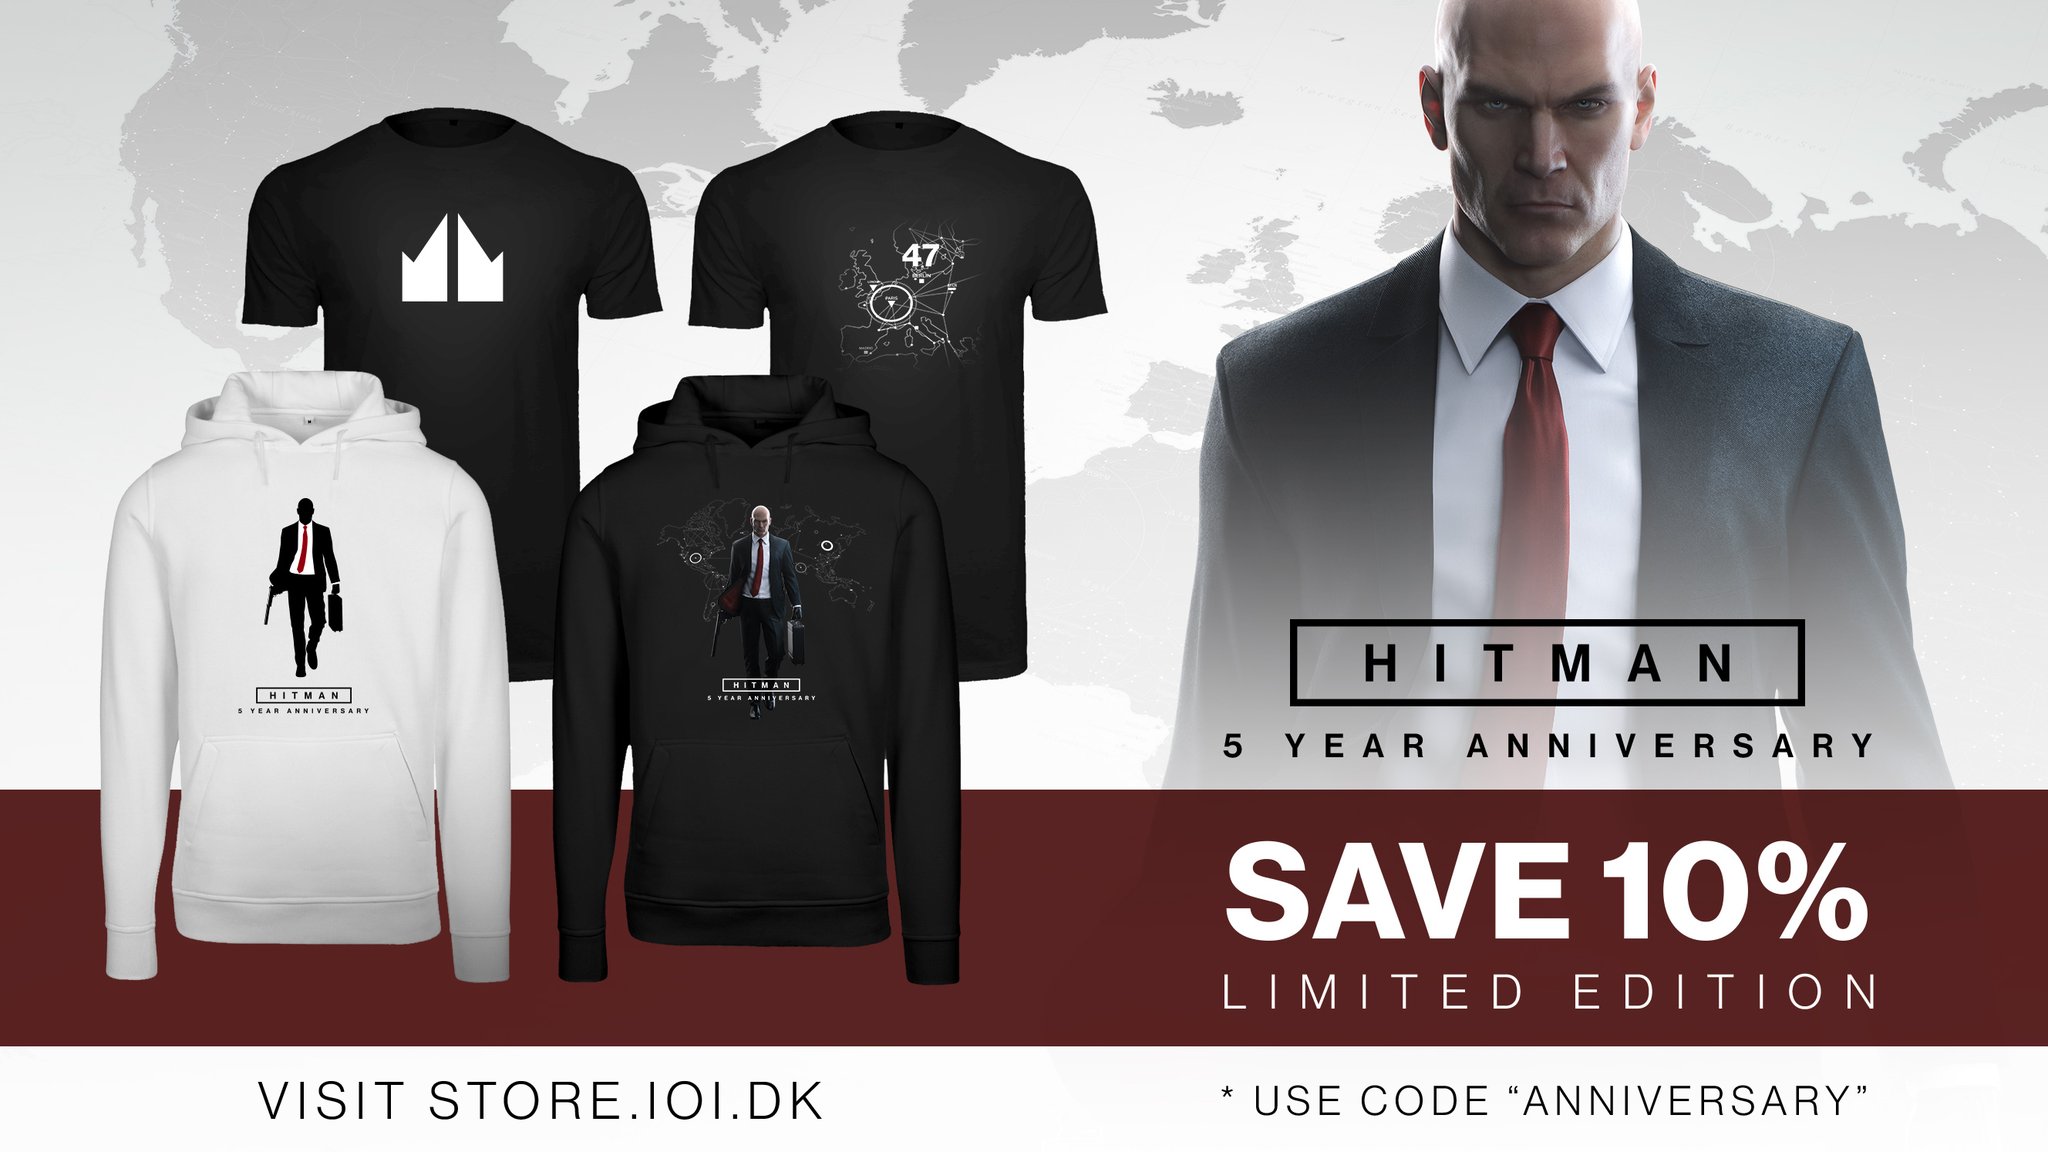 IO Interactive - Introducing the IOI Store! This is the